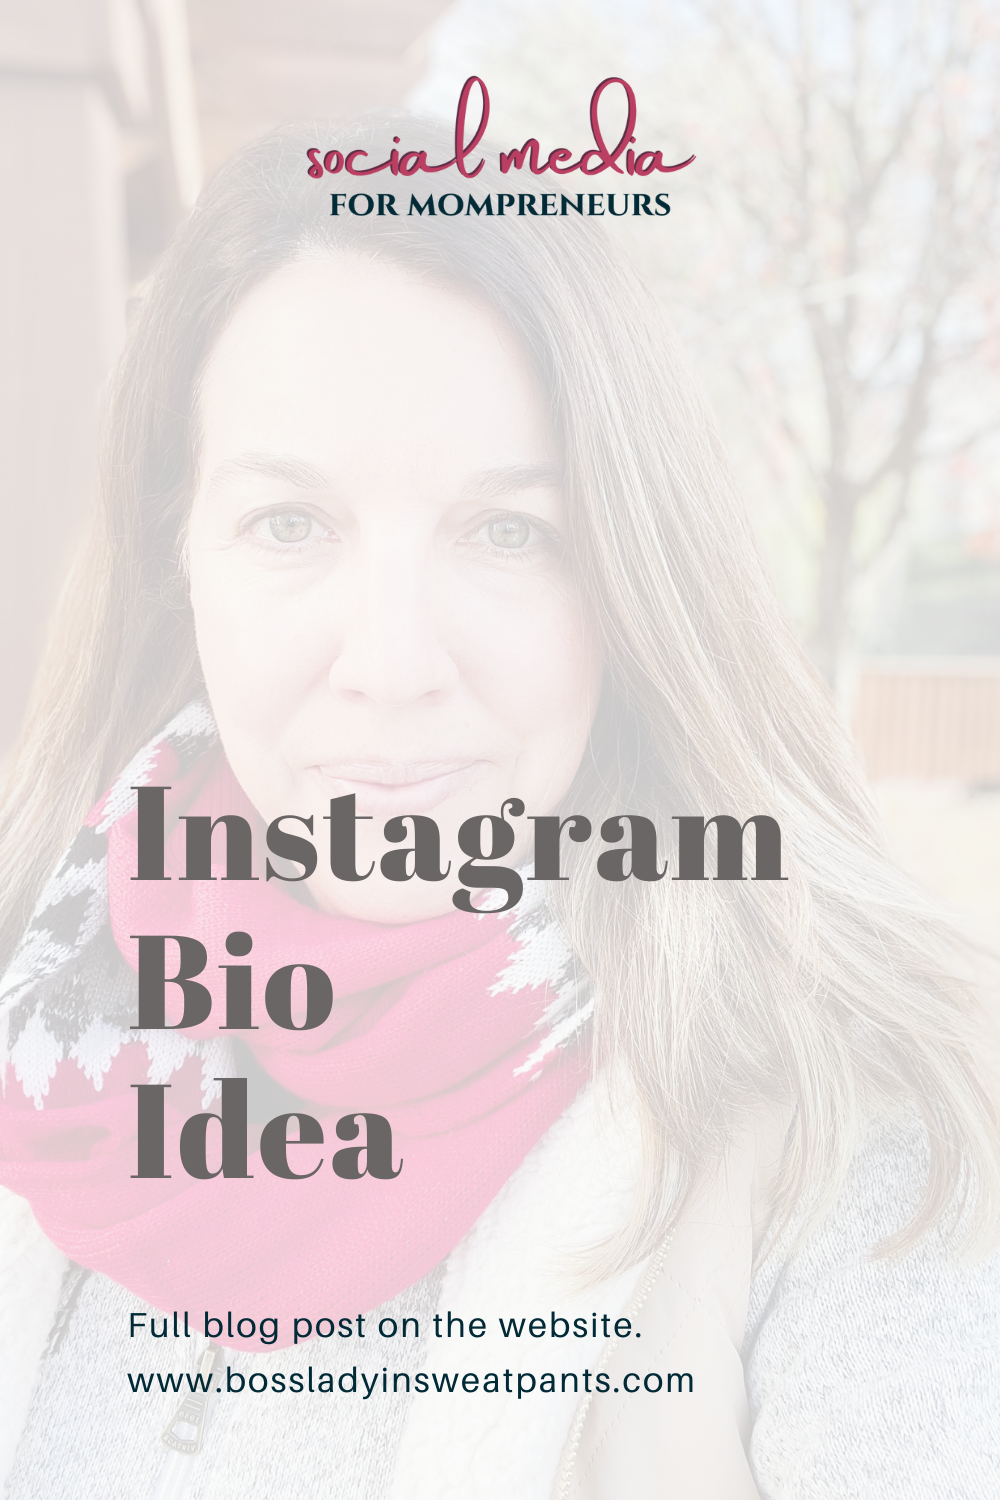 Let's jazz up your Instagram bio link! In this episode, you'll discover: the ONE thing to add to your bio link to stand out how and where to place it PLUS, what's coming to the Podcast show! See it in action here: www.instagram.com/allisonscholes